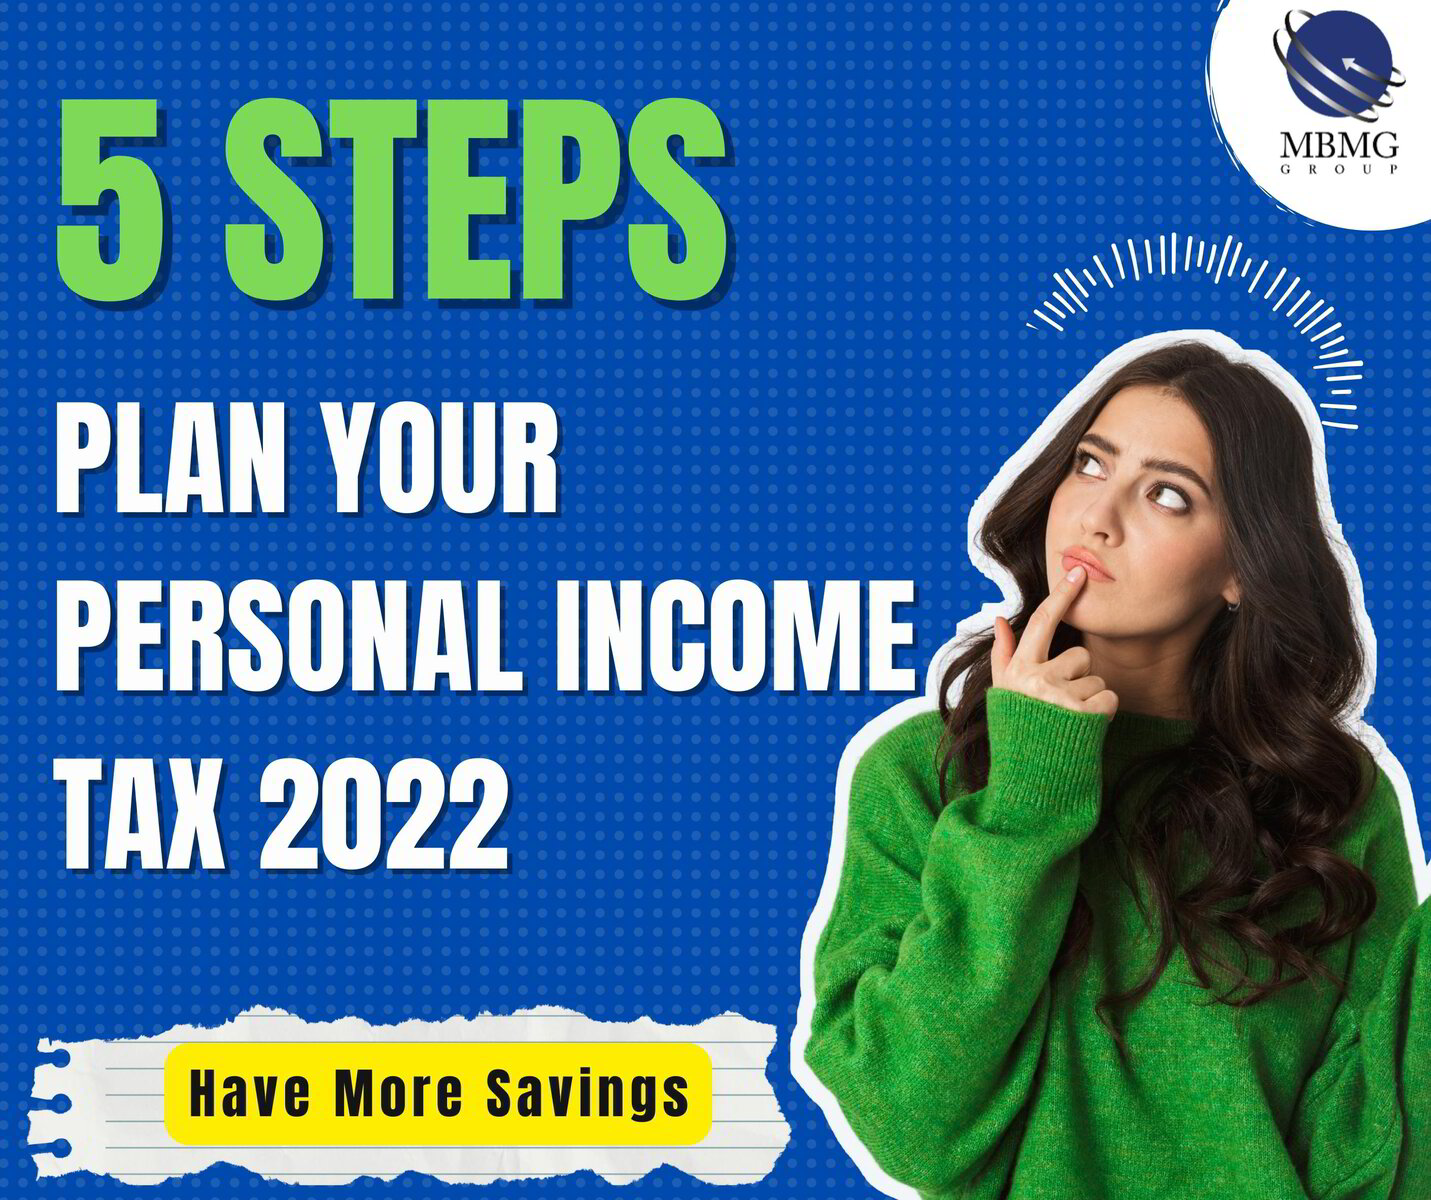 5 Steps to Plan Your Personal Income Tax 2022 to Have More Savings 💰